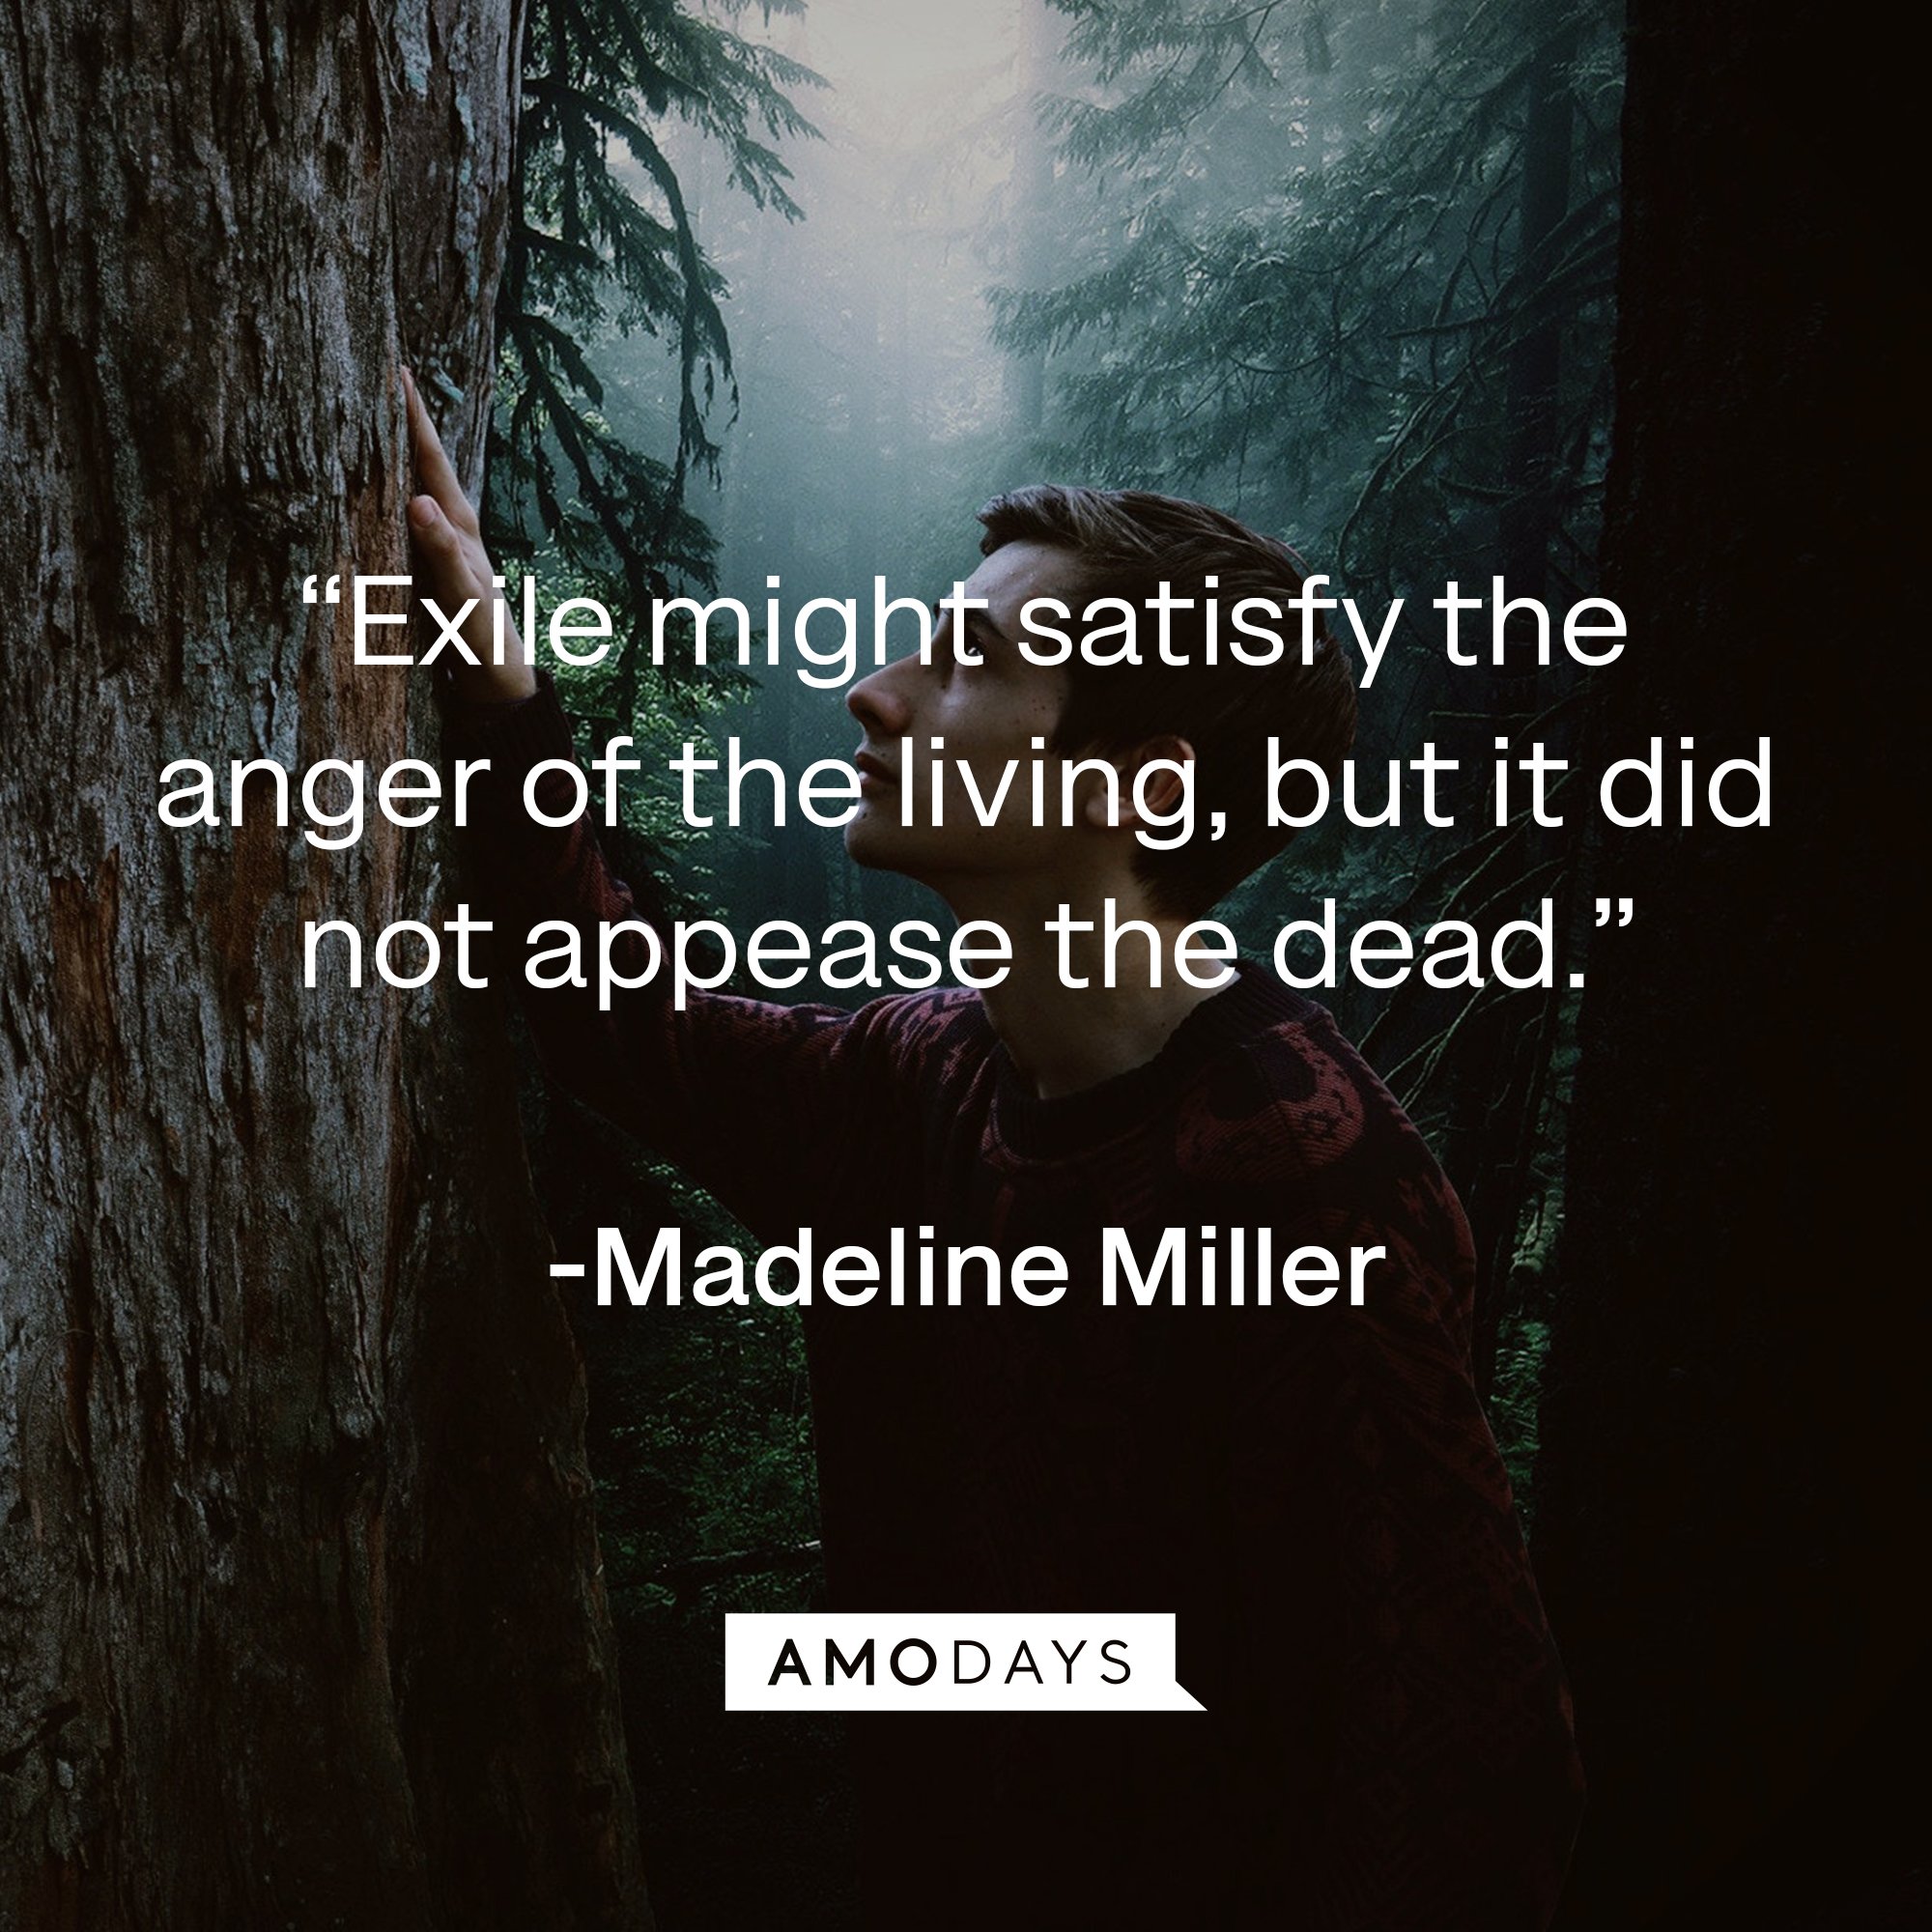 Madeline Miller's quote: “Exile might satisfy the anger of the living, but it did not appease the dead.” | Image: AmoDays